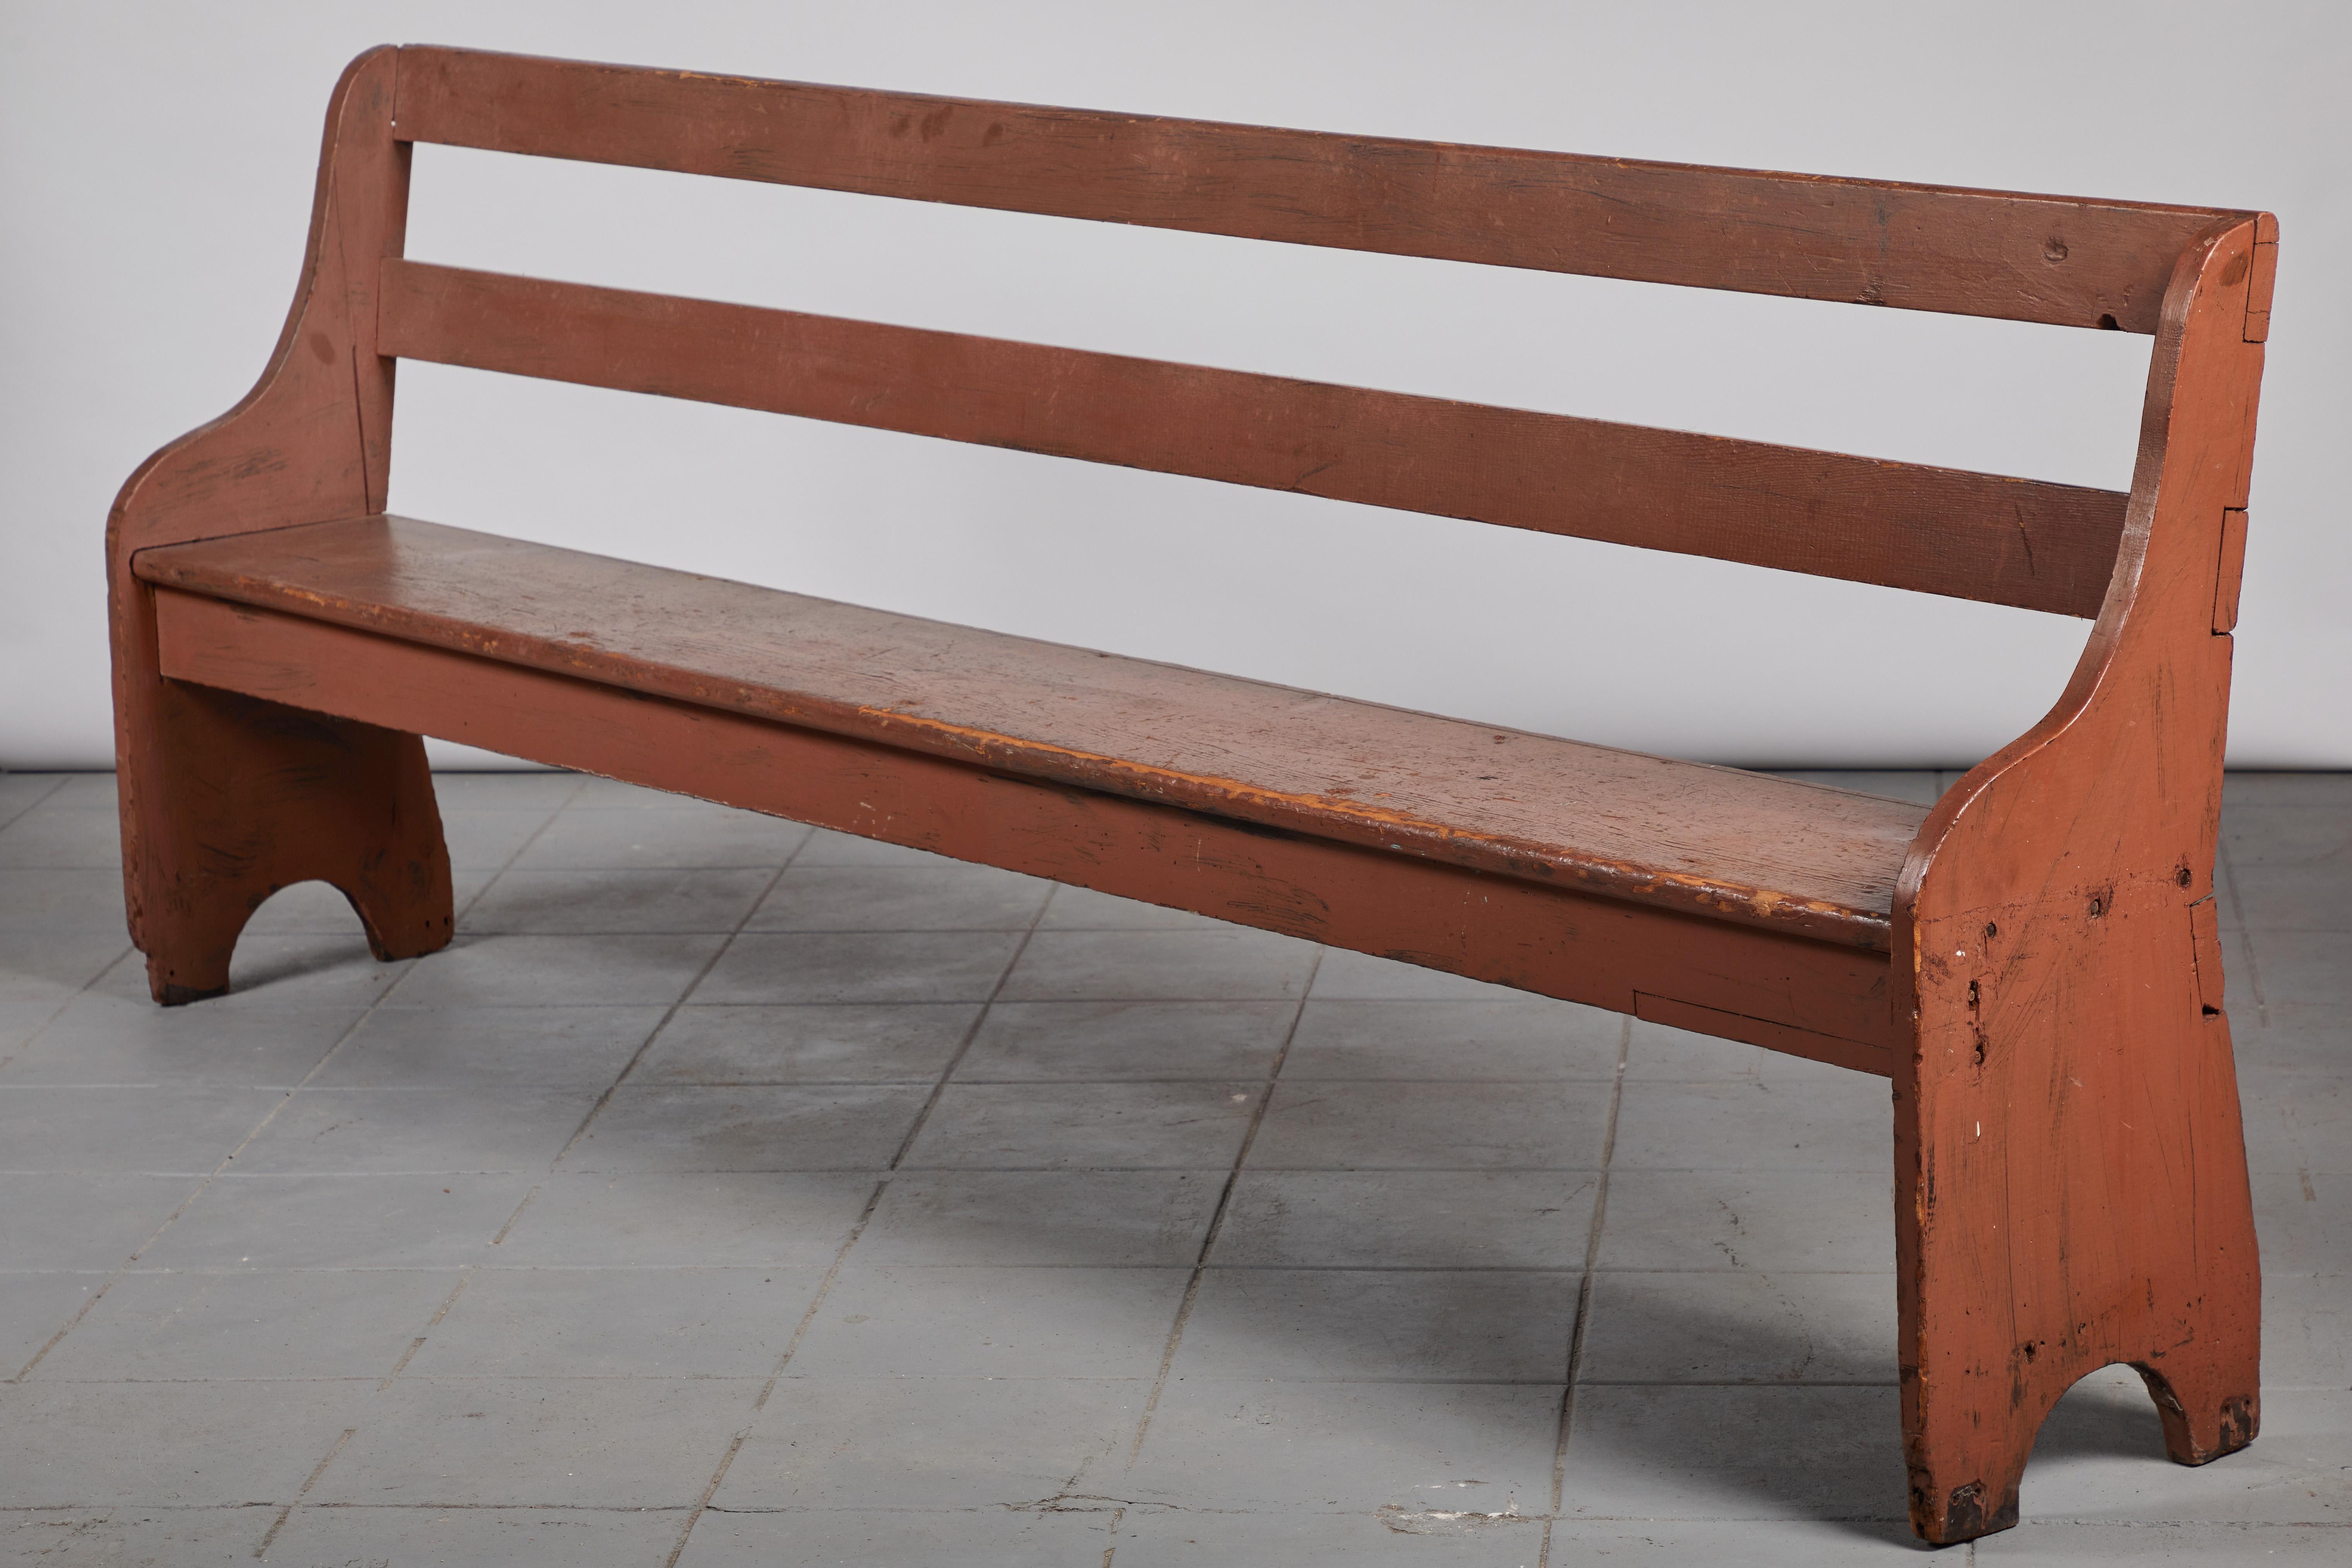 20th Century Early American Shaker Style Painted Wooden Bench